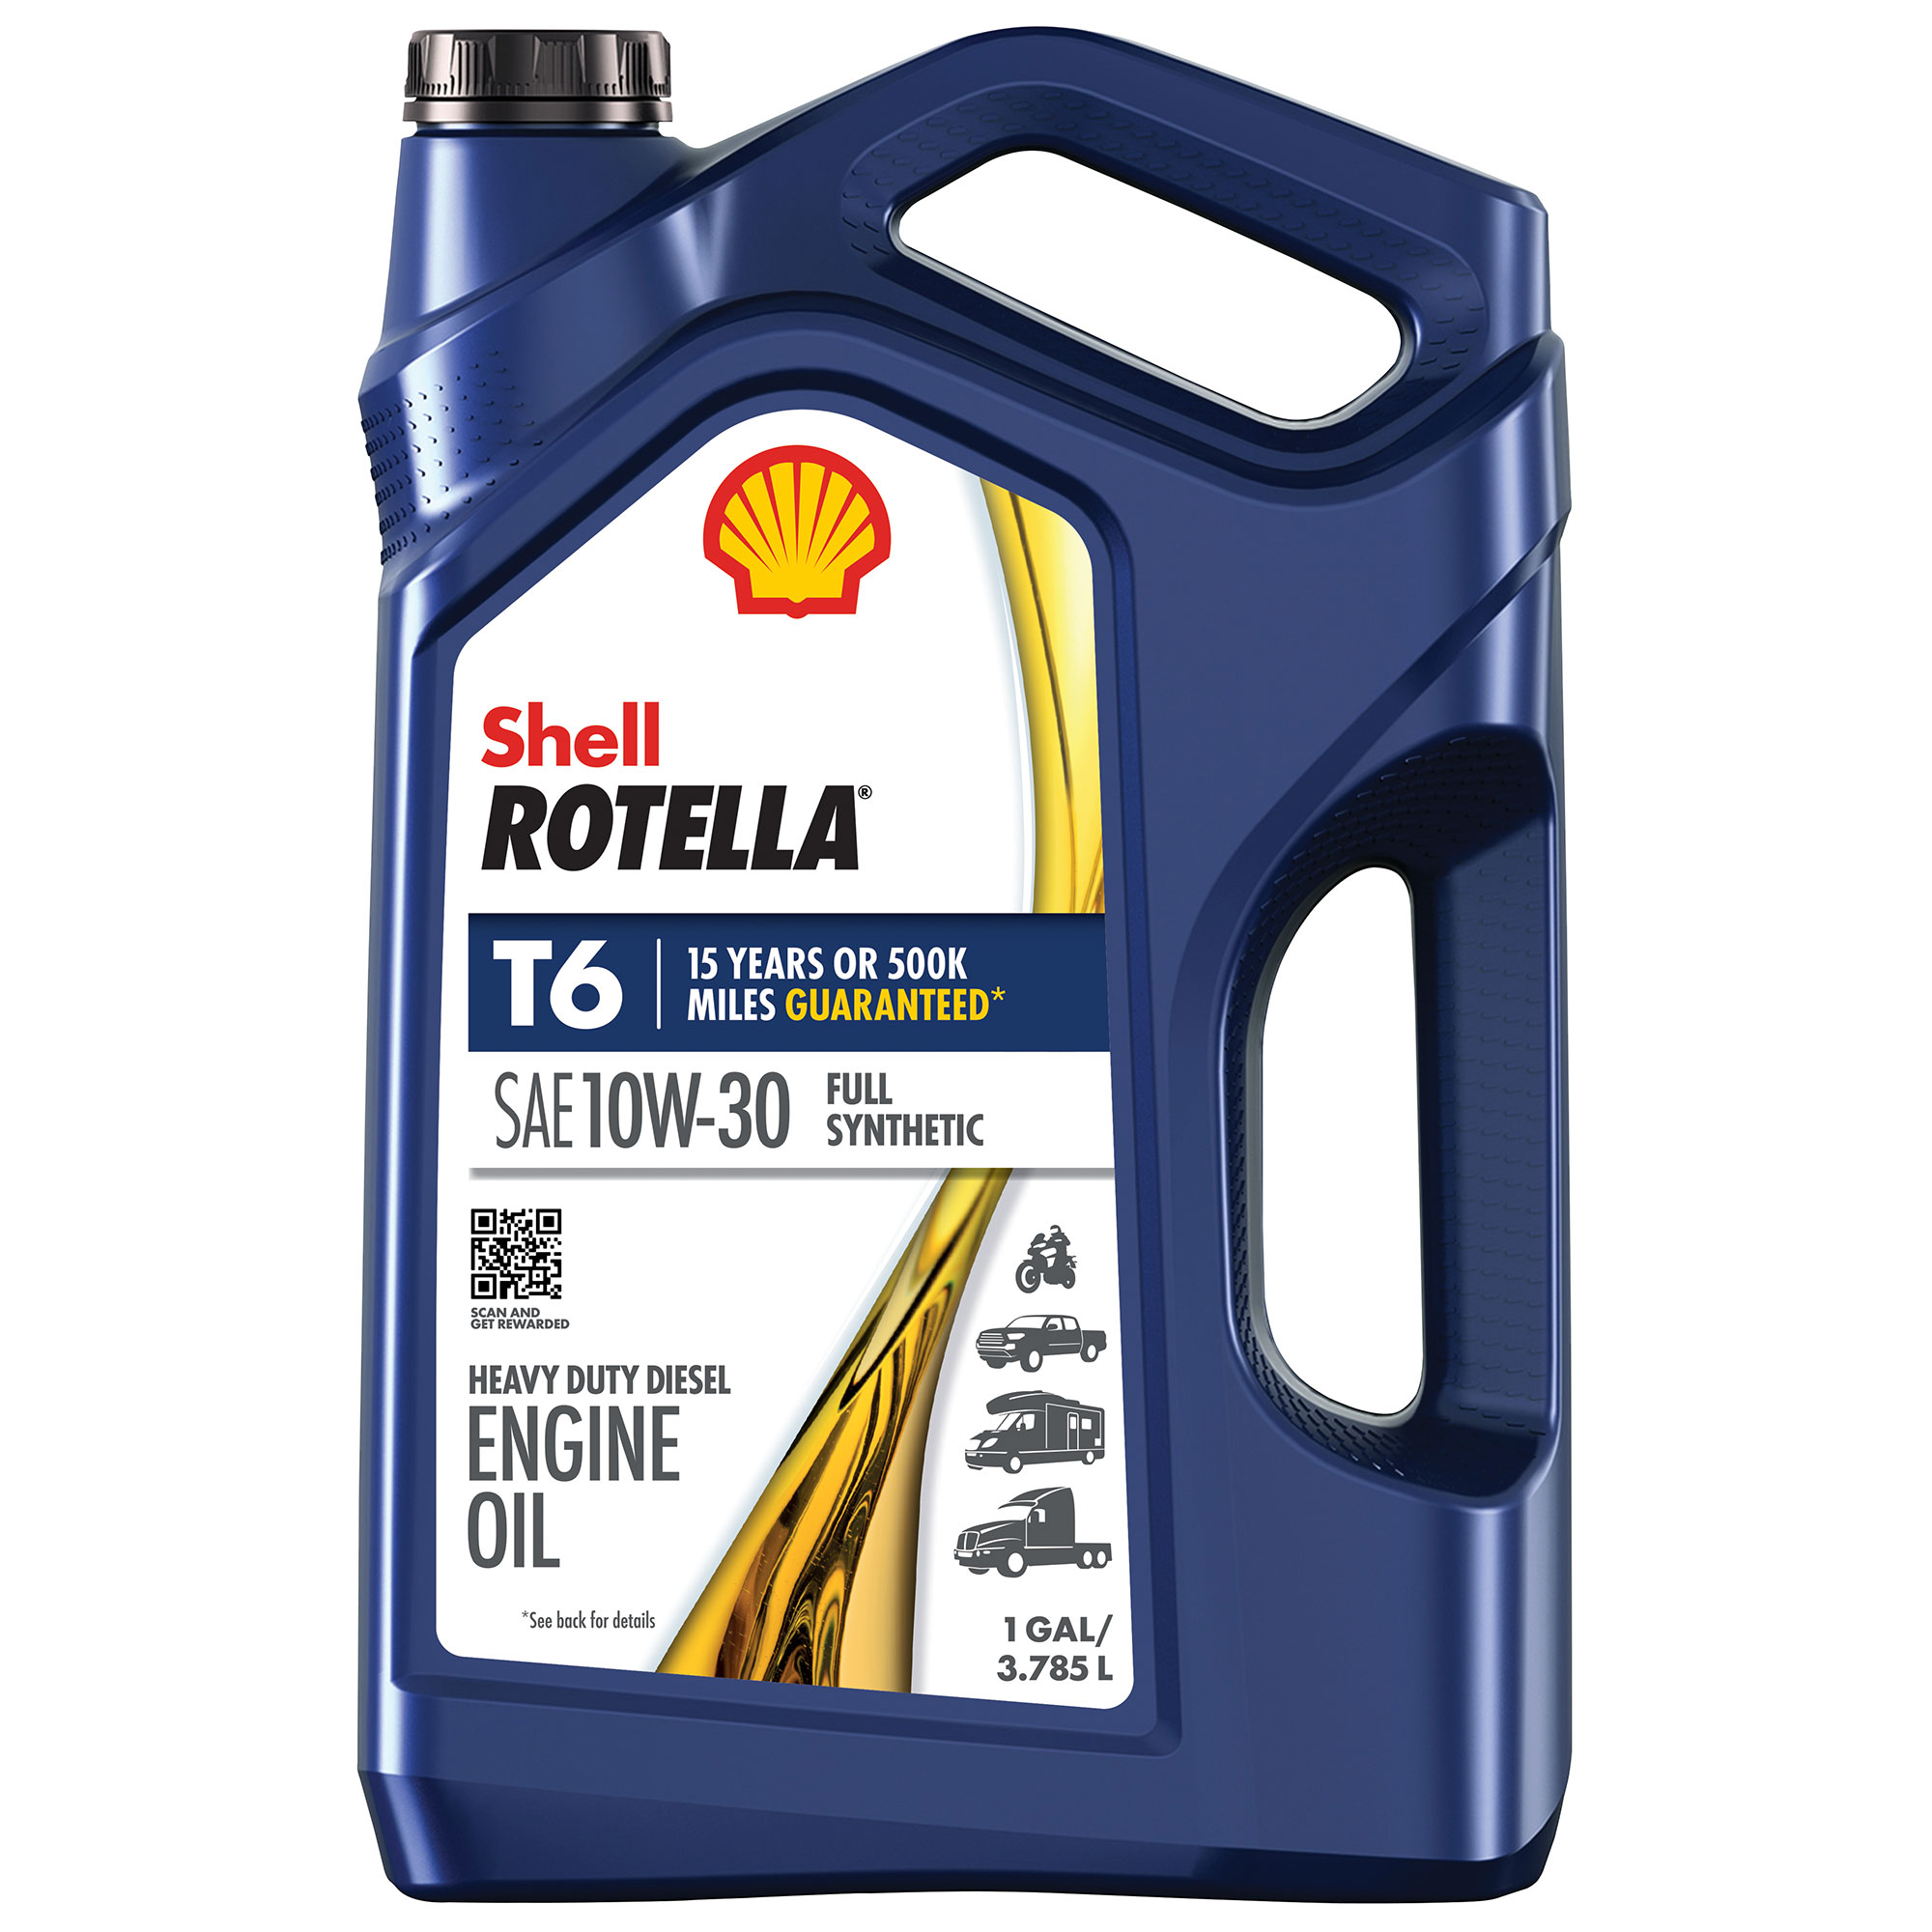 Shell Rotella T6 10W 30 Offers Fuel Economy Engine Protection Truck News